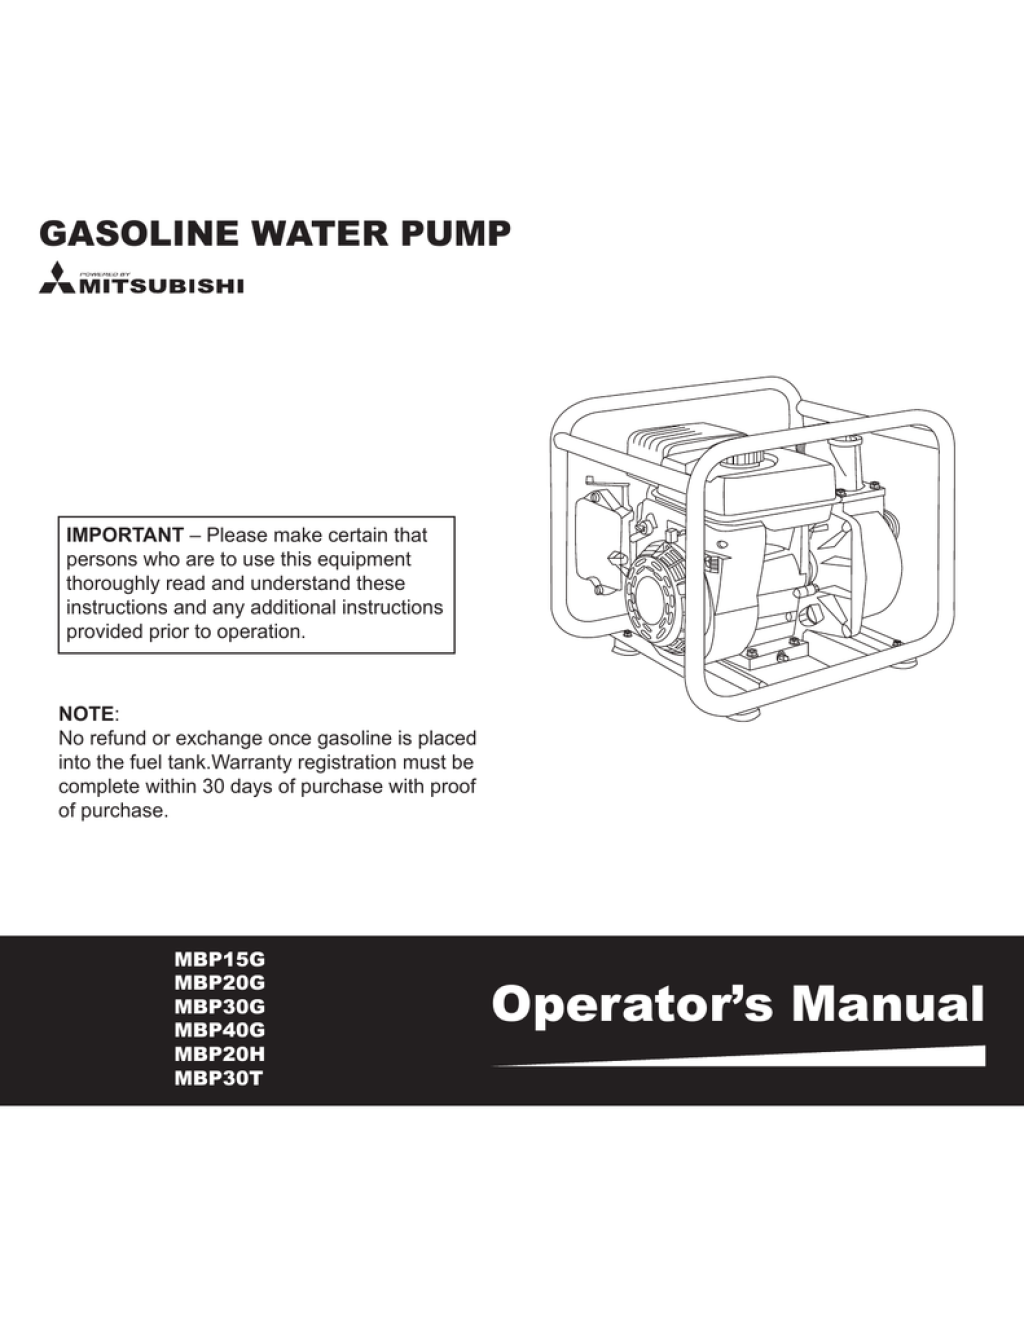 Picture of: Water pump manual  Manualzz